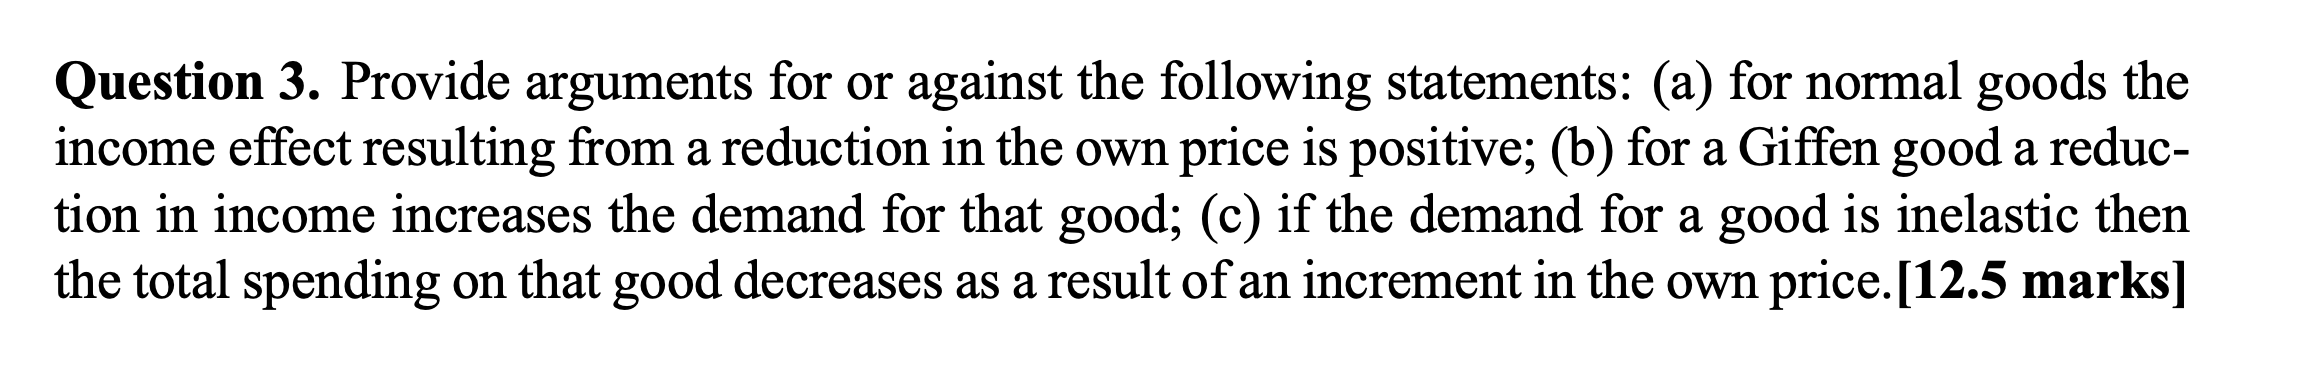 Question 3. Provide arguments for or against the following statements: (a) for normal goods the income effect resulting from